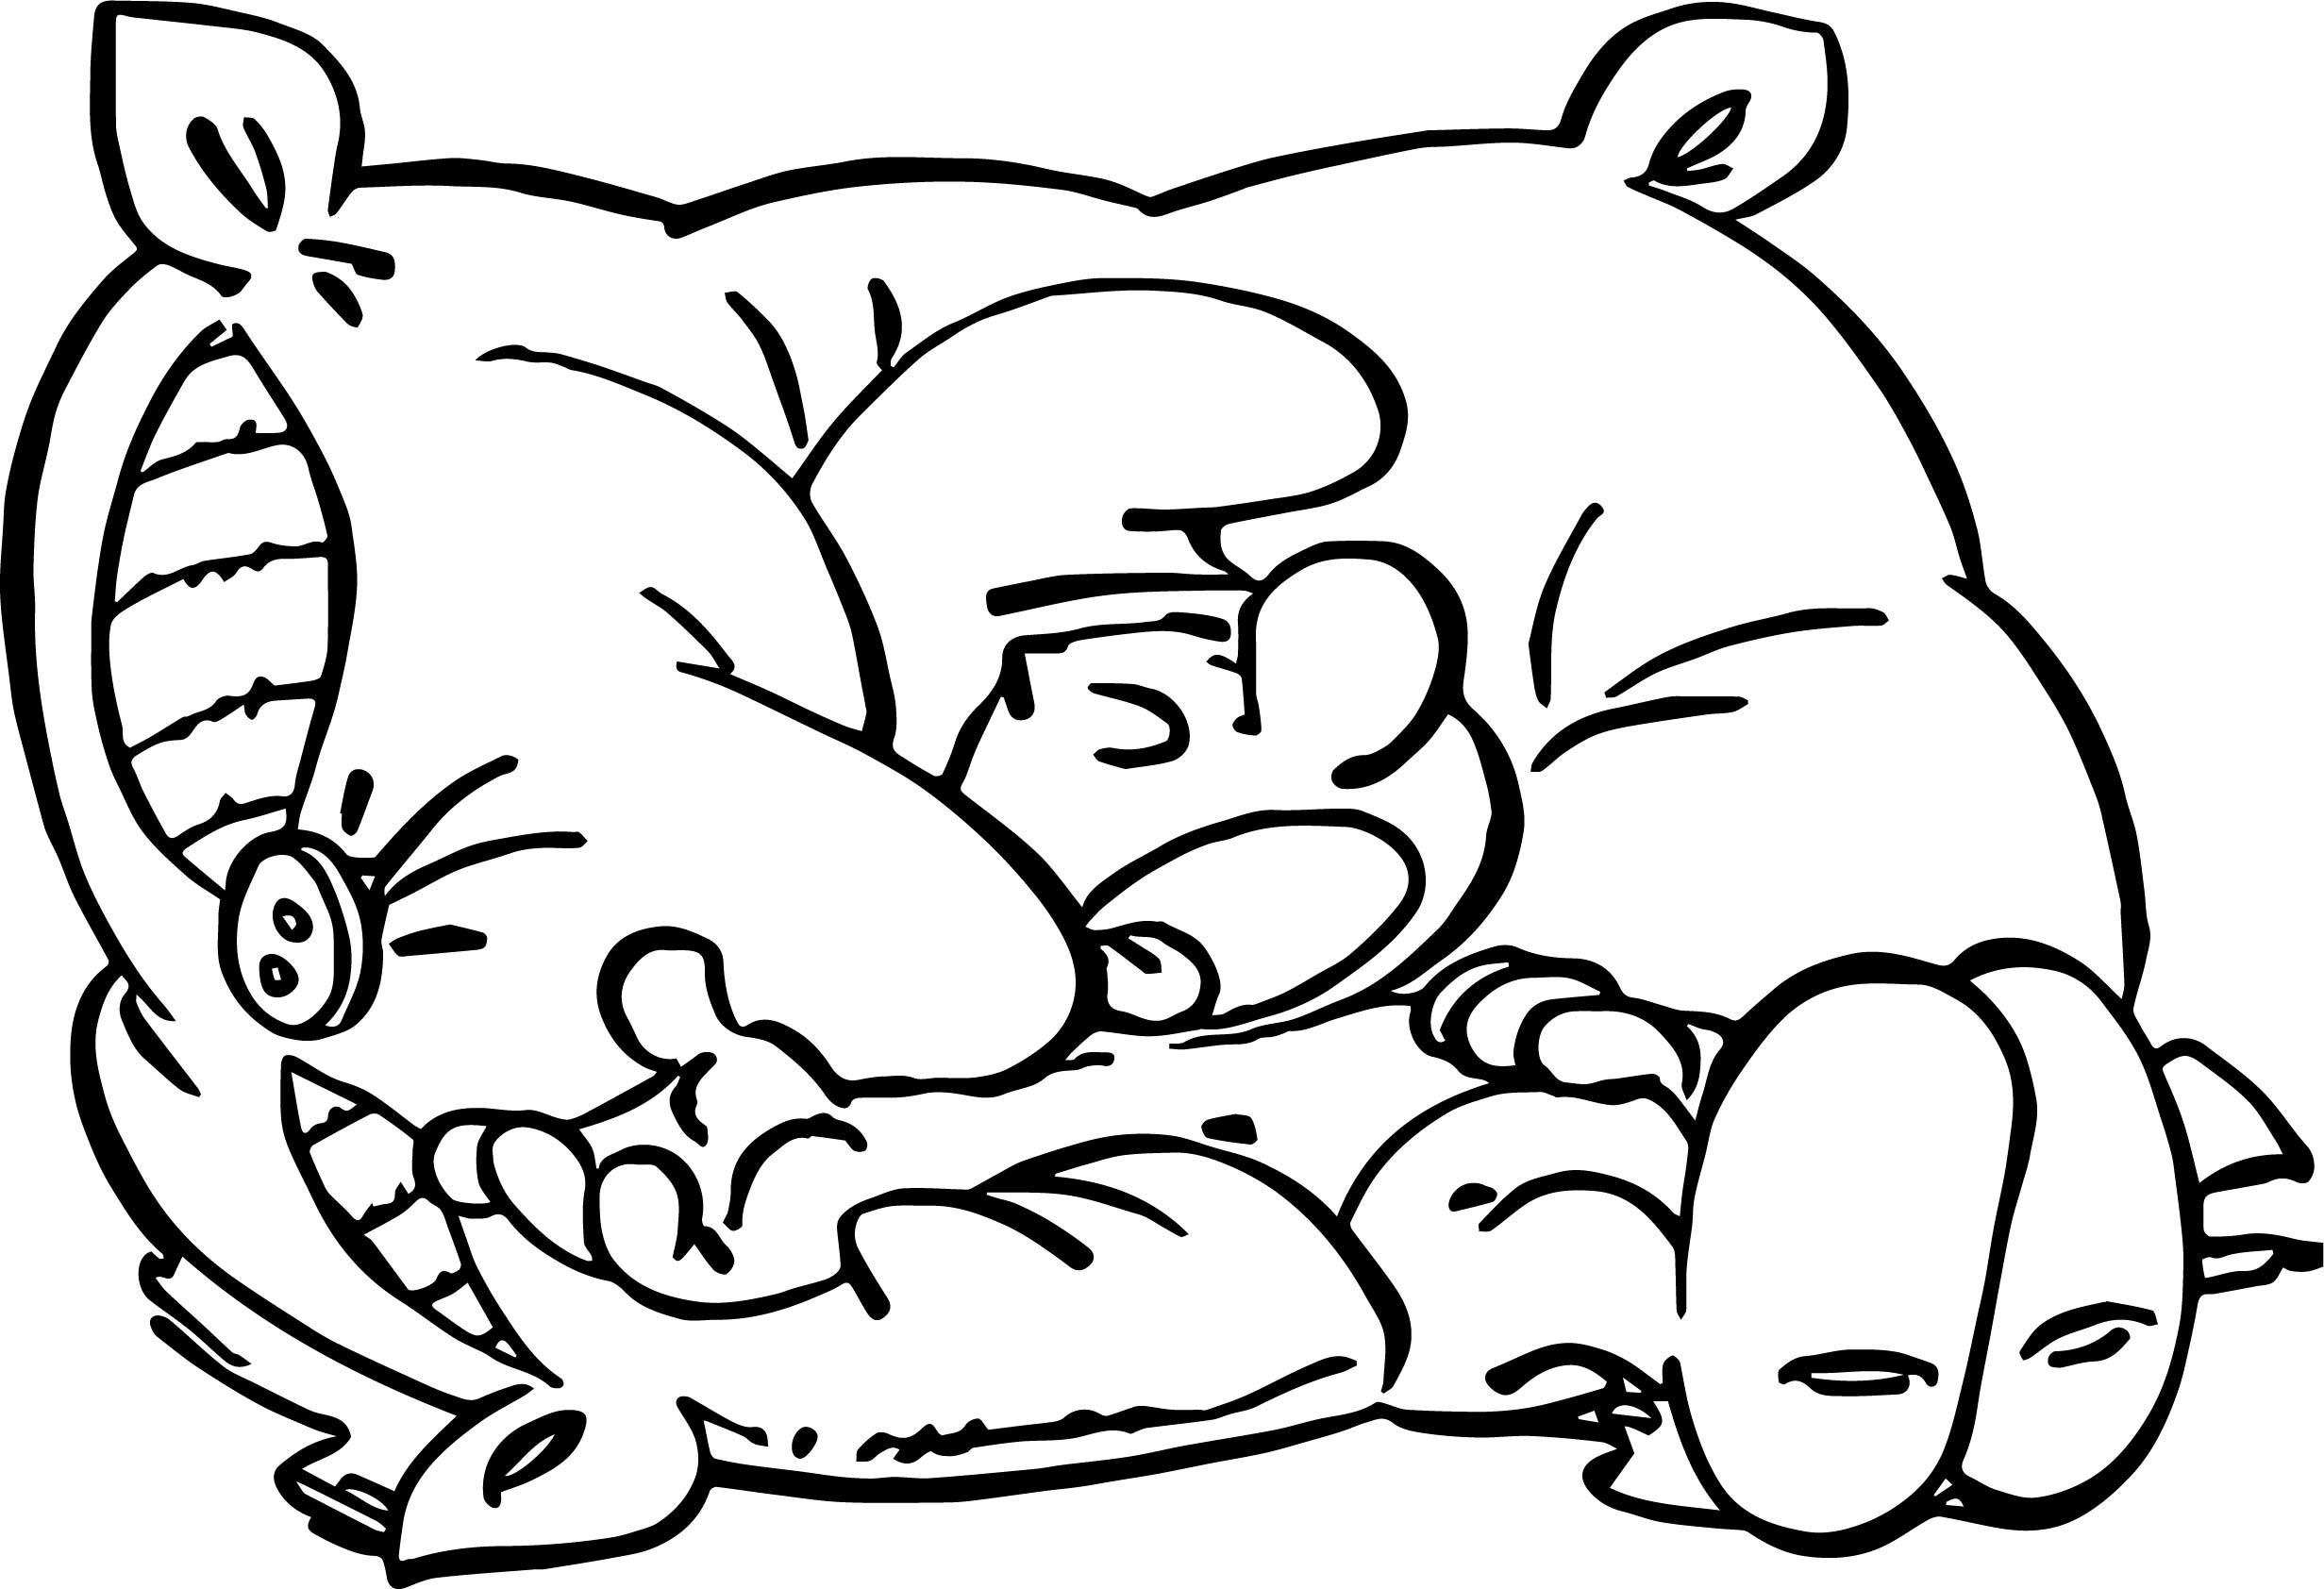 cool Sleepy Smurf On Pillow Coloring Page | Coloring pages, Christmas  present coloring pages, Christmas coloring pages